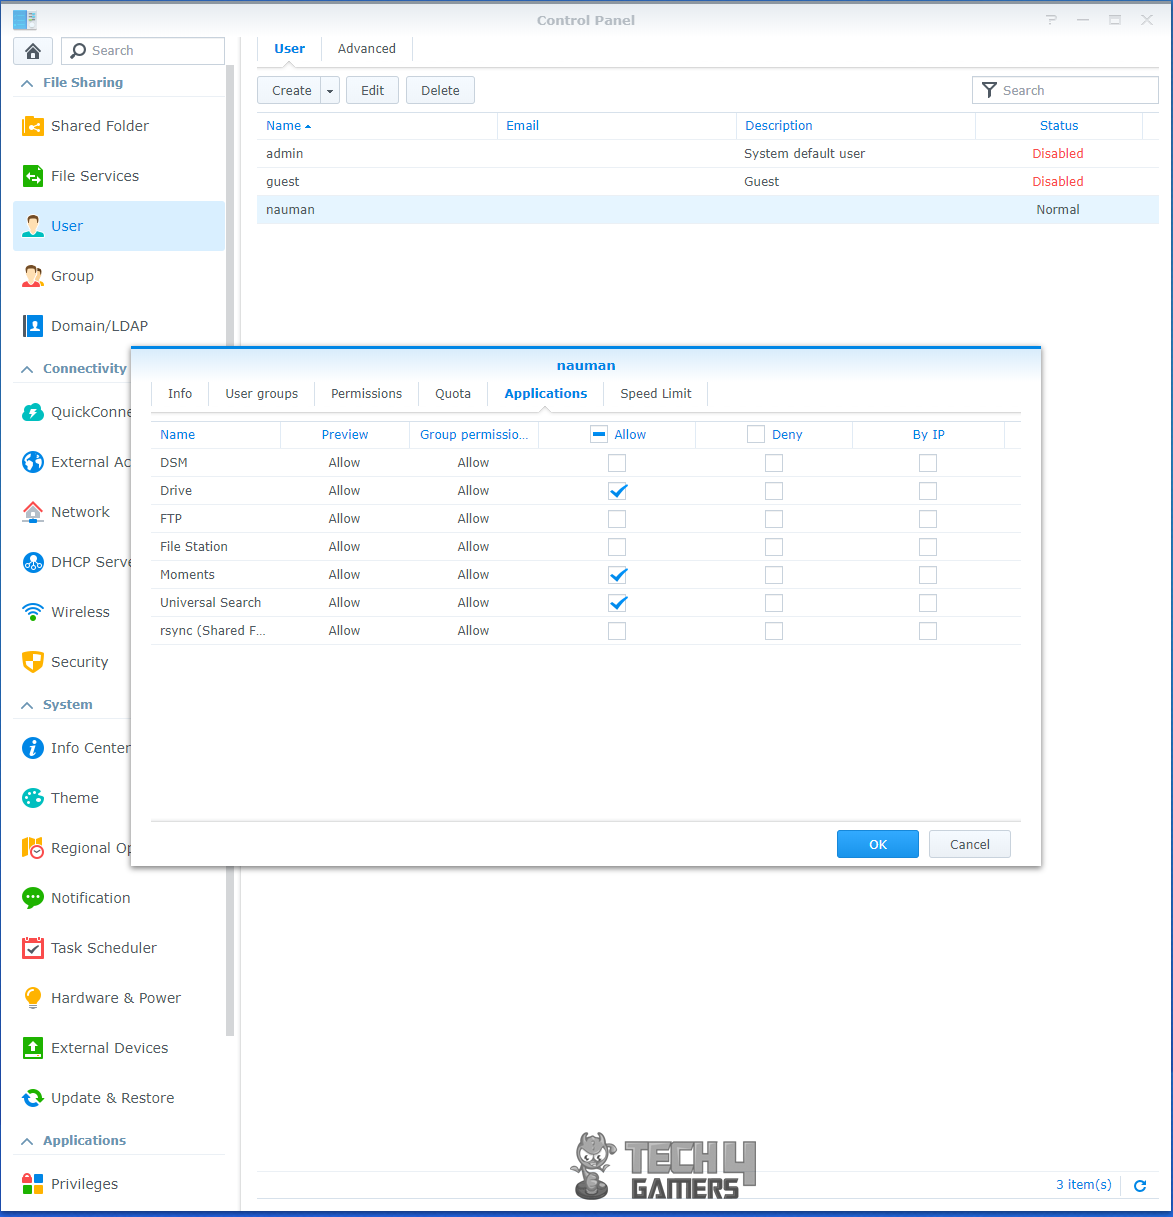 Synology 218+ Under Application